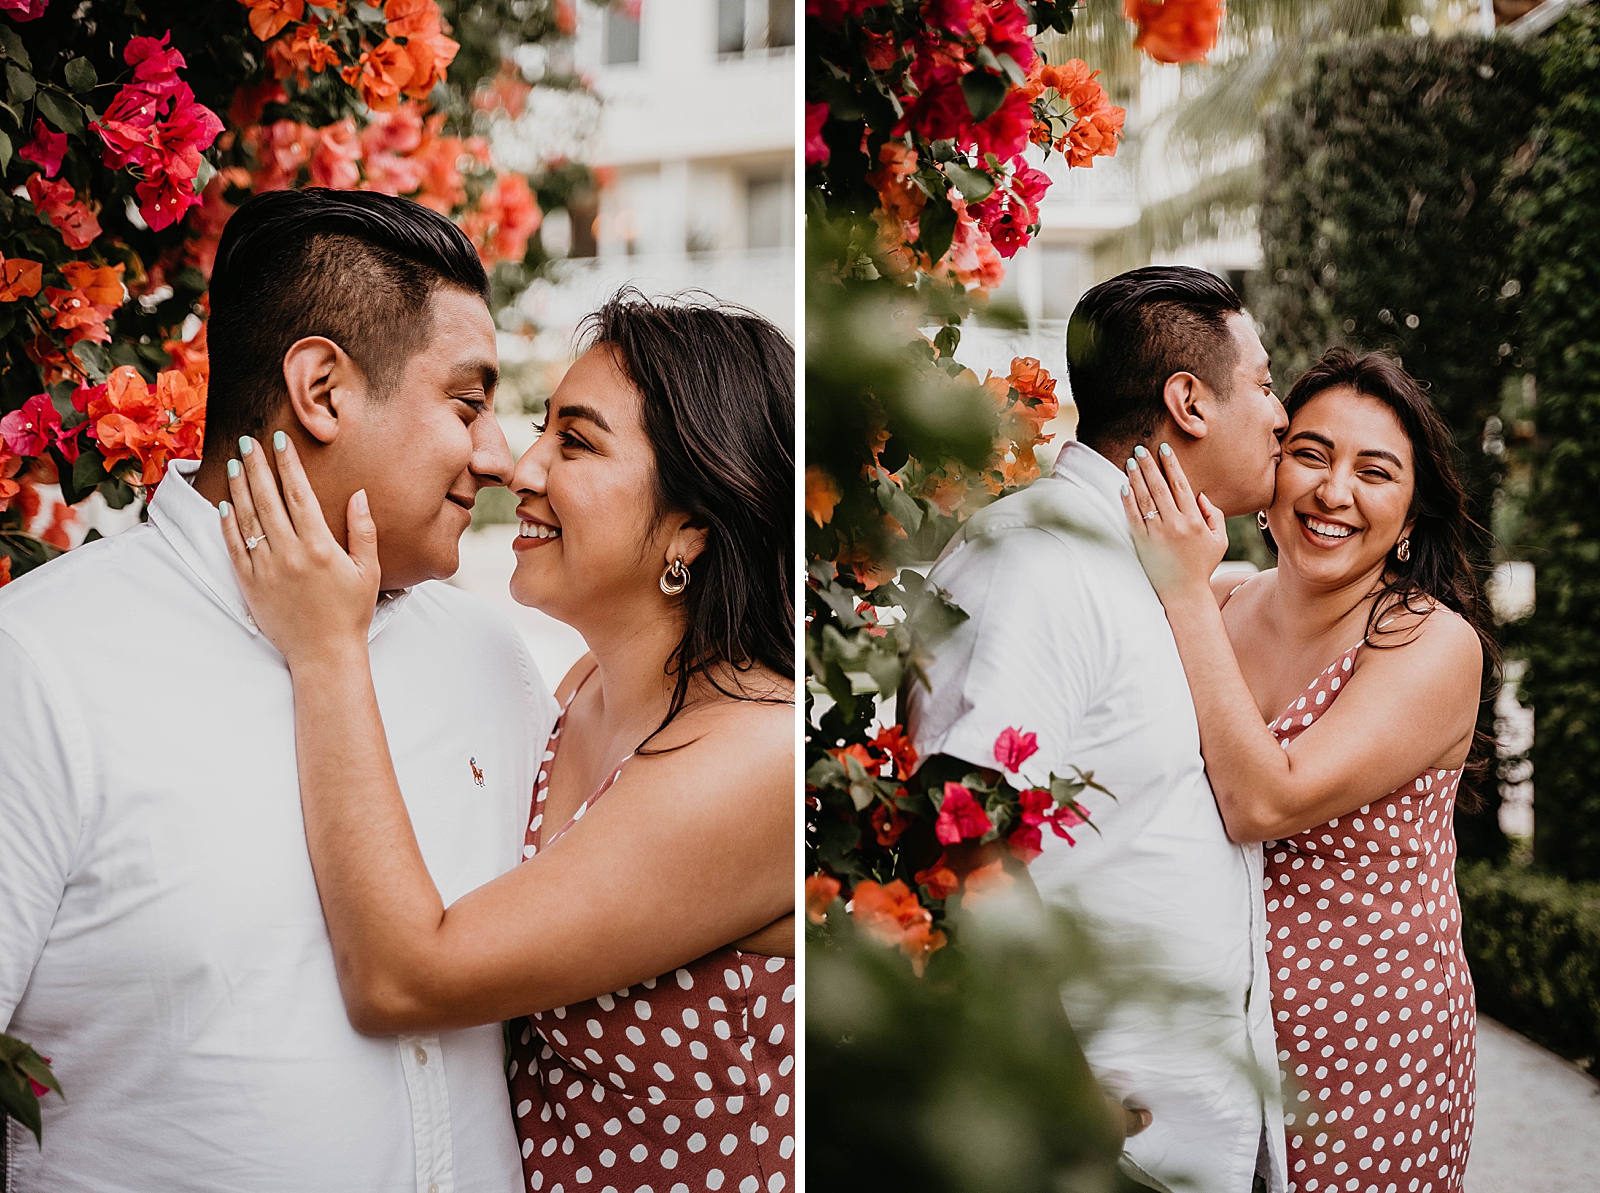 Couple nuzzling and holding each other by flowers Palm Beach Island Engagement Photography captured by South Florida Engagement Photographer Krystal Capone Photography 